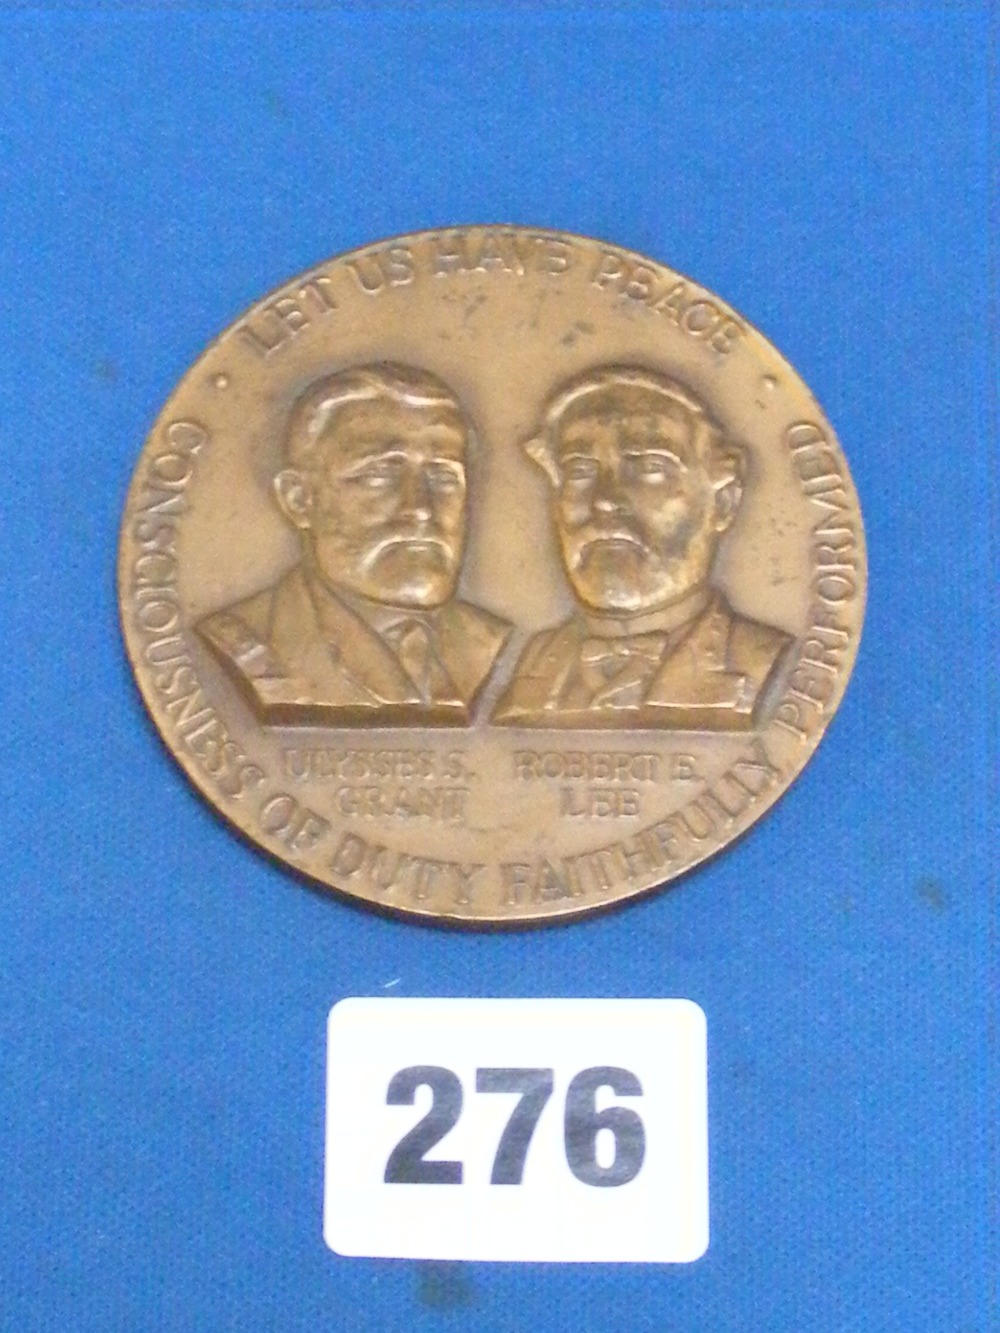 A commemorative large medallion issued i